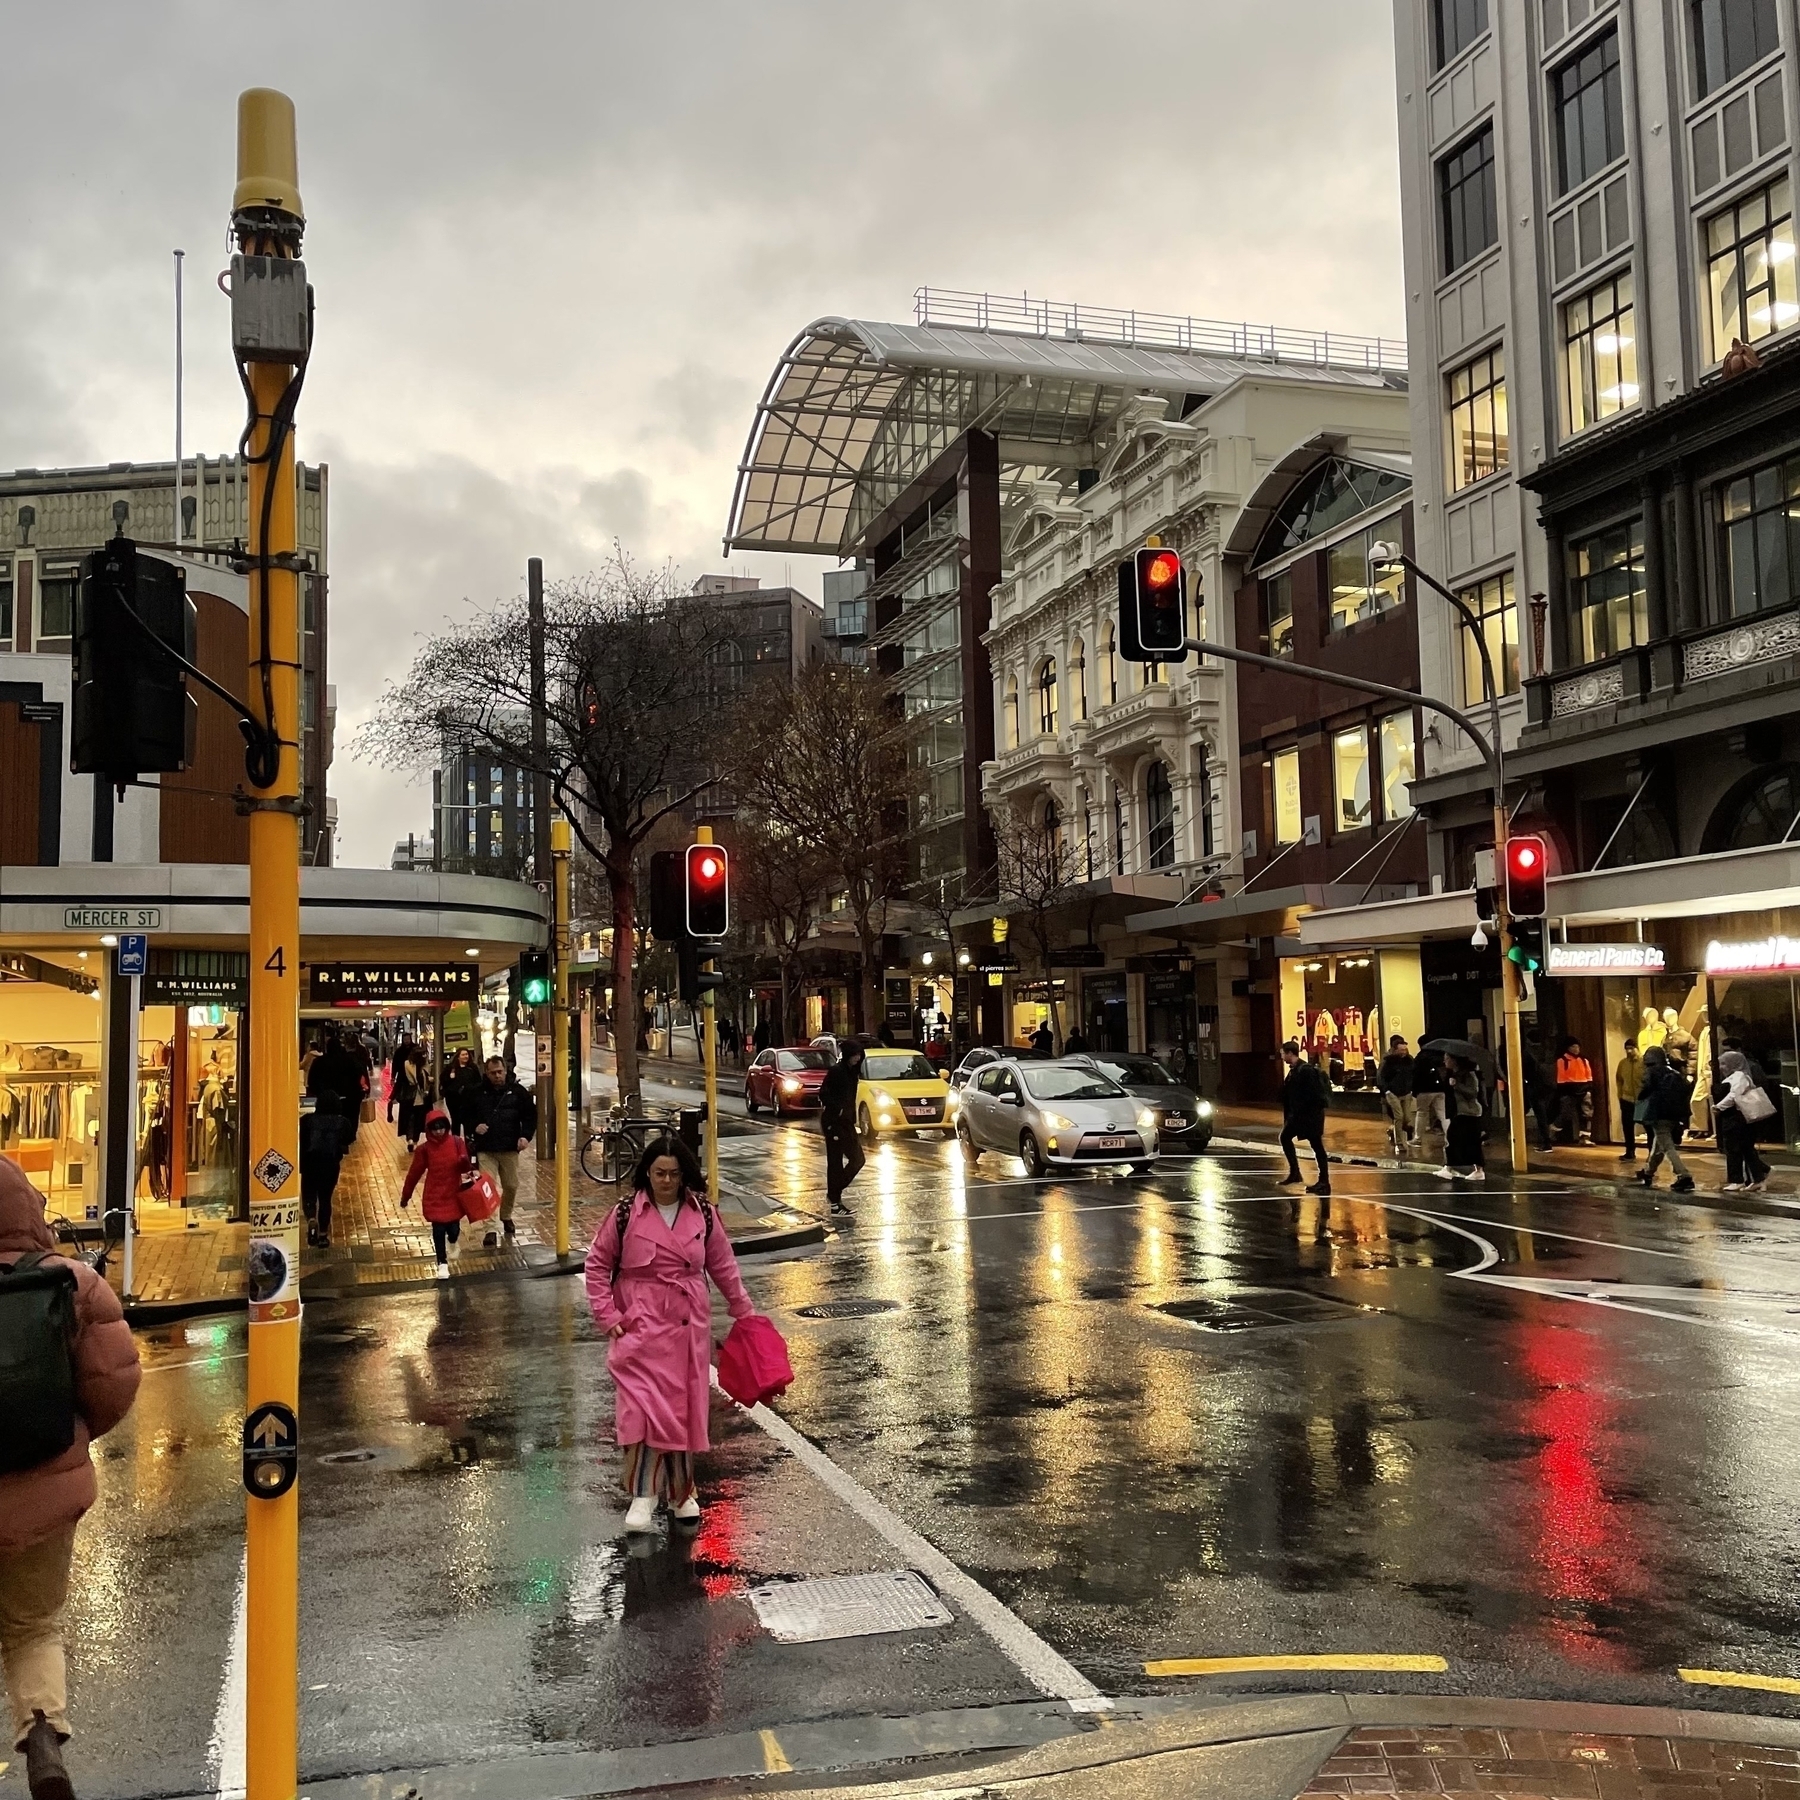 Rain washed street scape with yellow and red lights from shops, cars and street lights reflecting on the street. People in pink, red and other colours cross the road. 